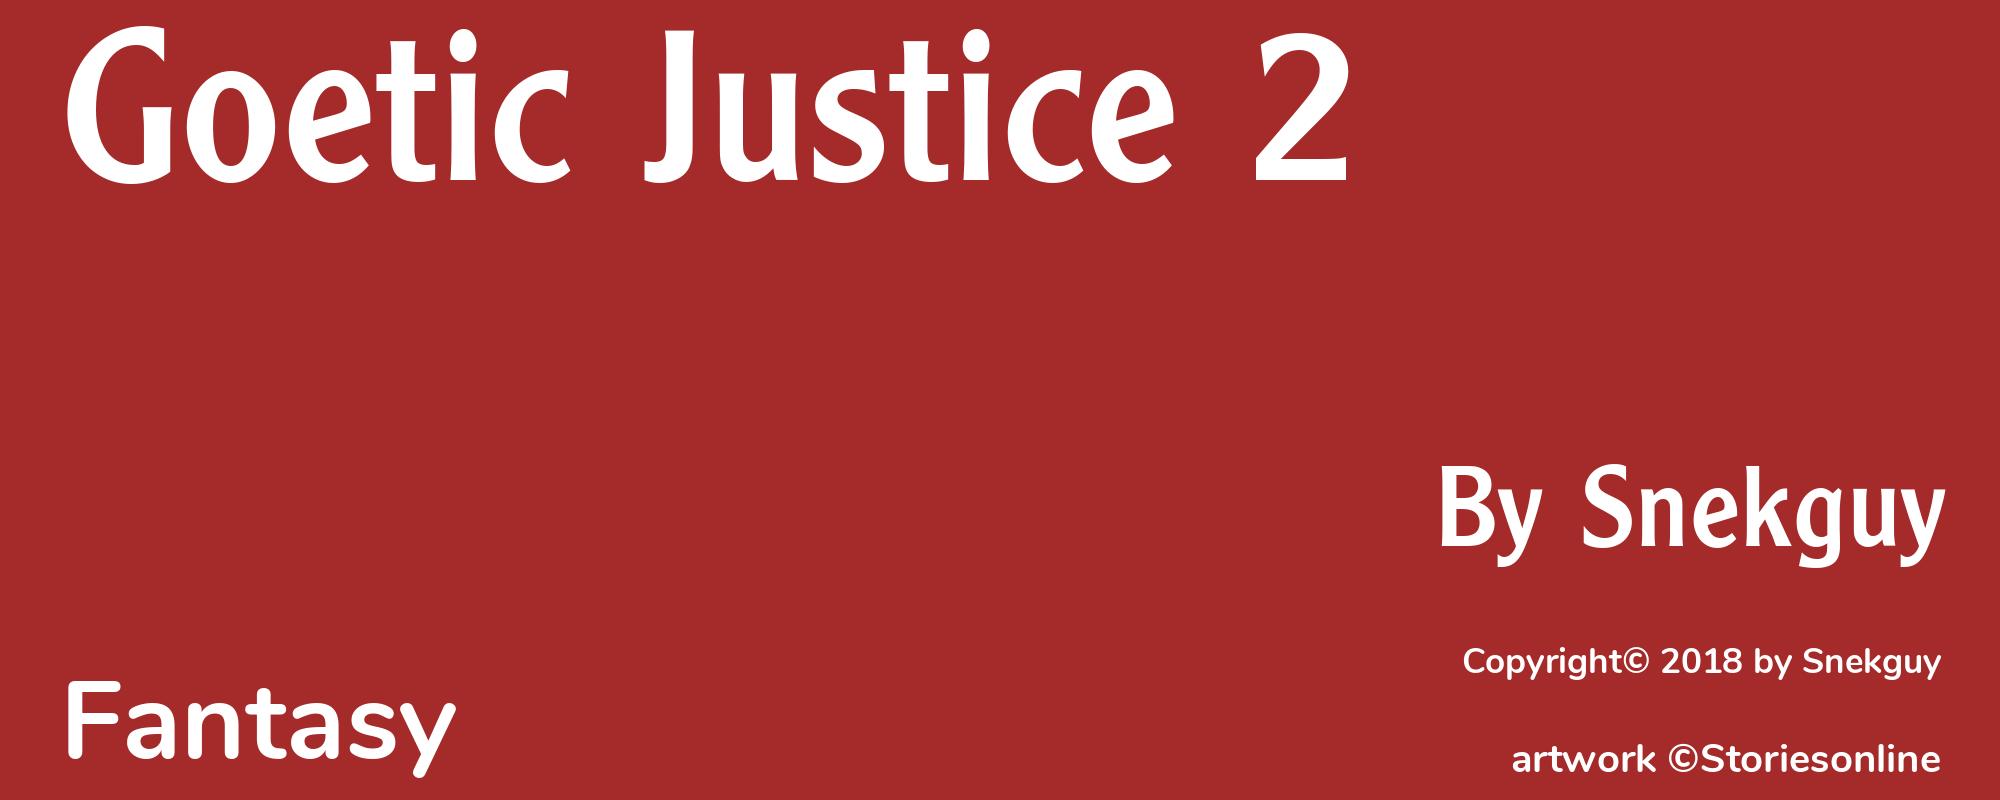 Goetic Justice 2 - Cover